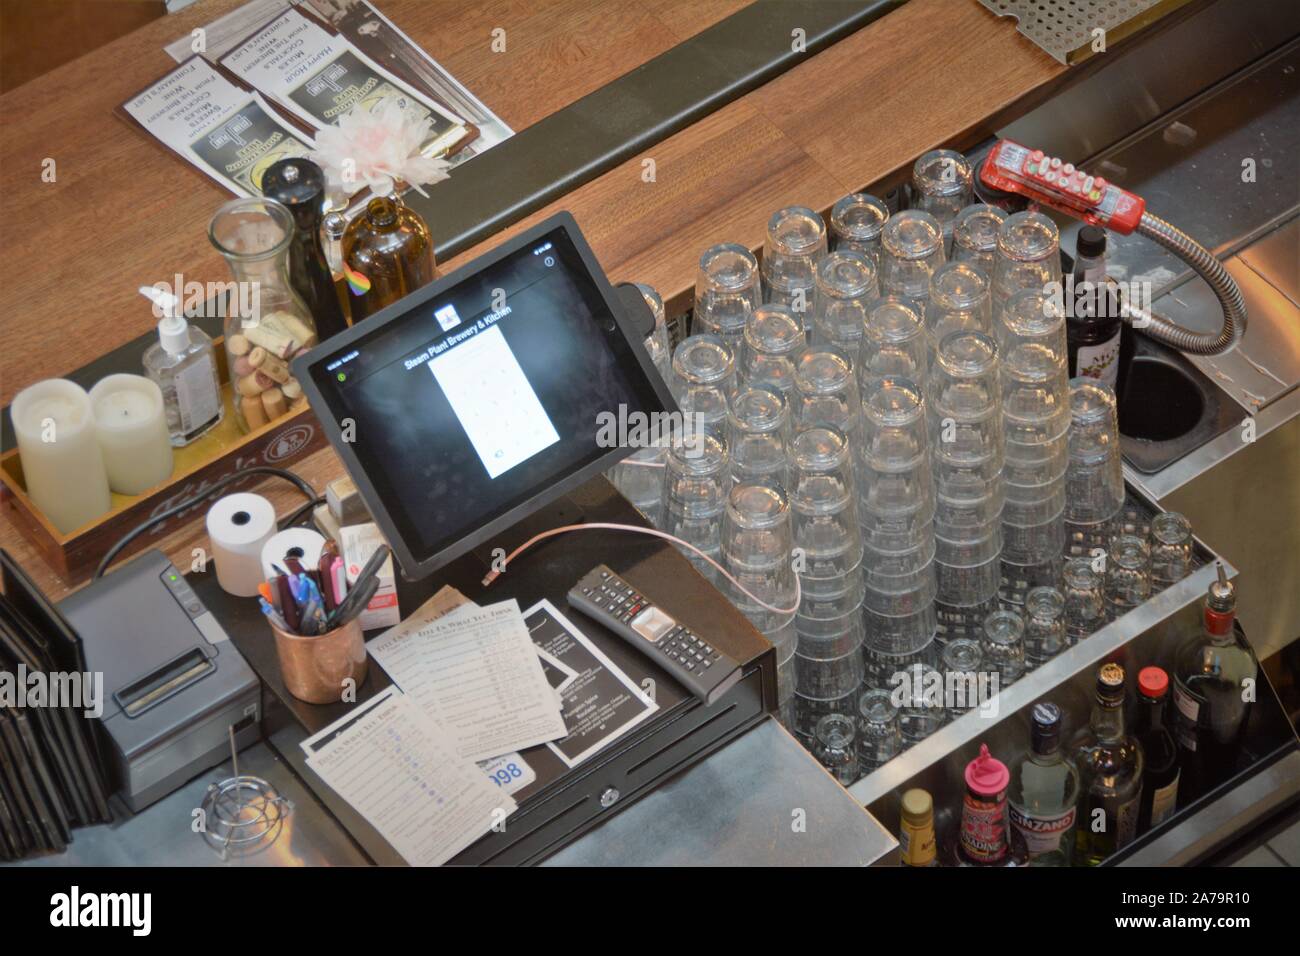 Restaurant bar setup for serving drinks with full service computer for record keeping of sales Stock Photo